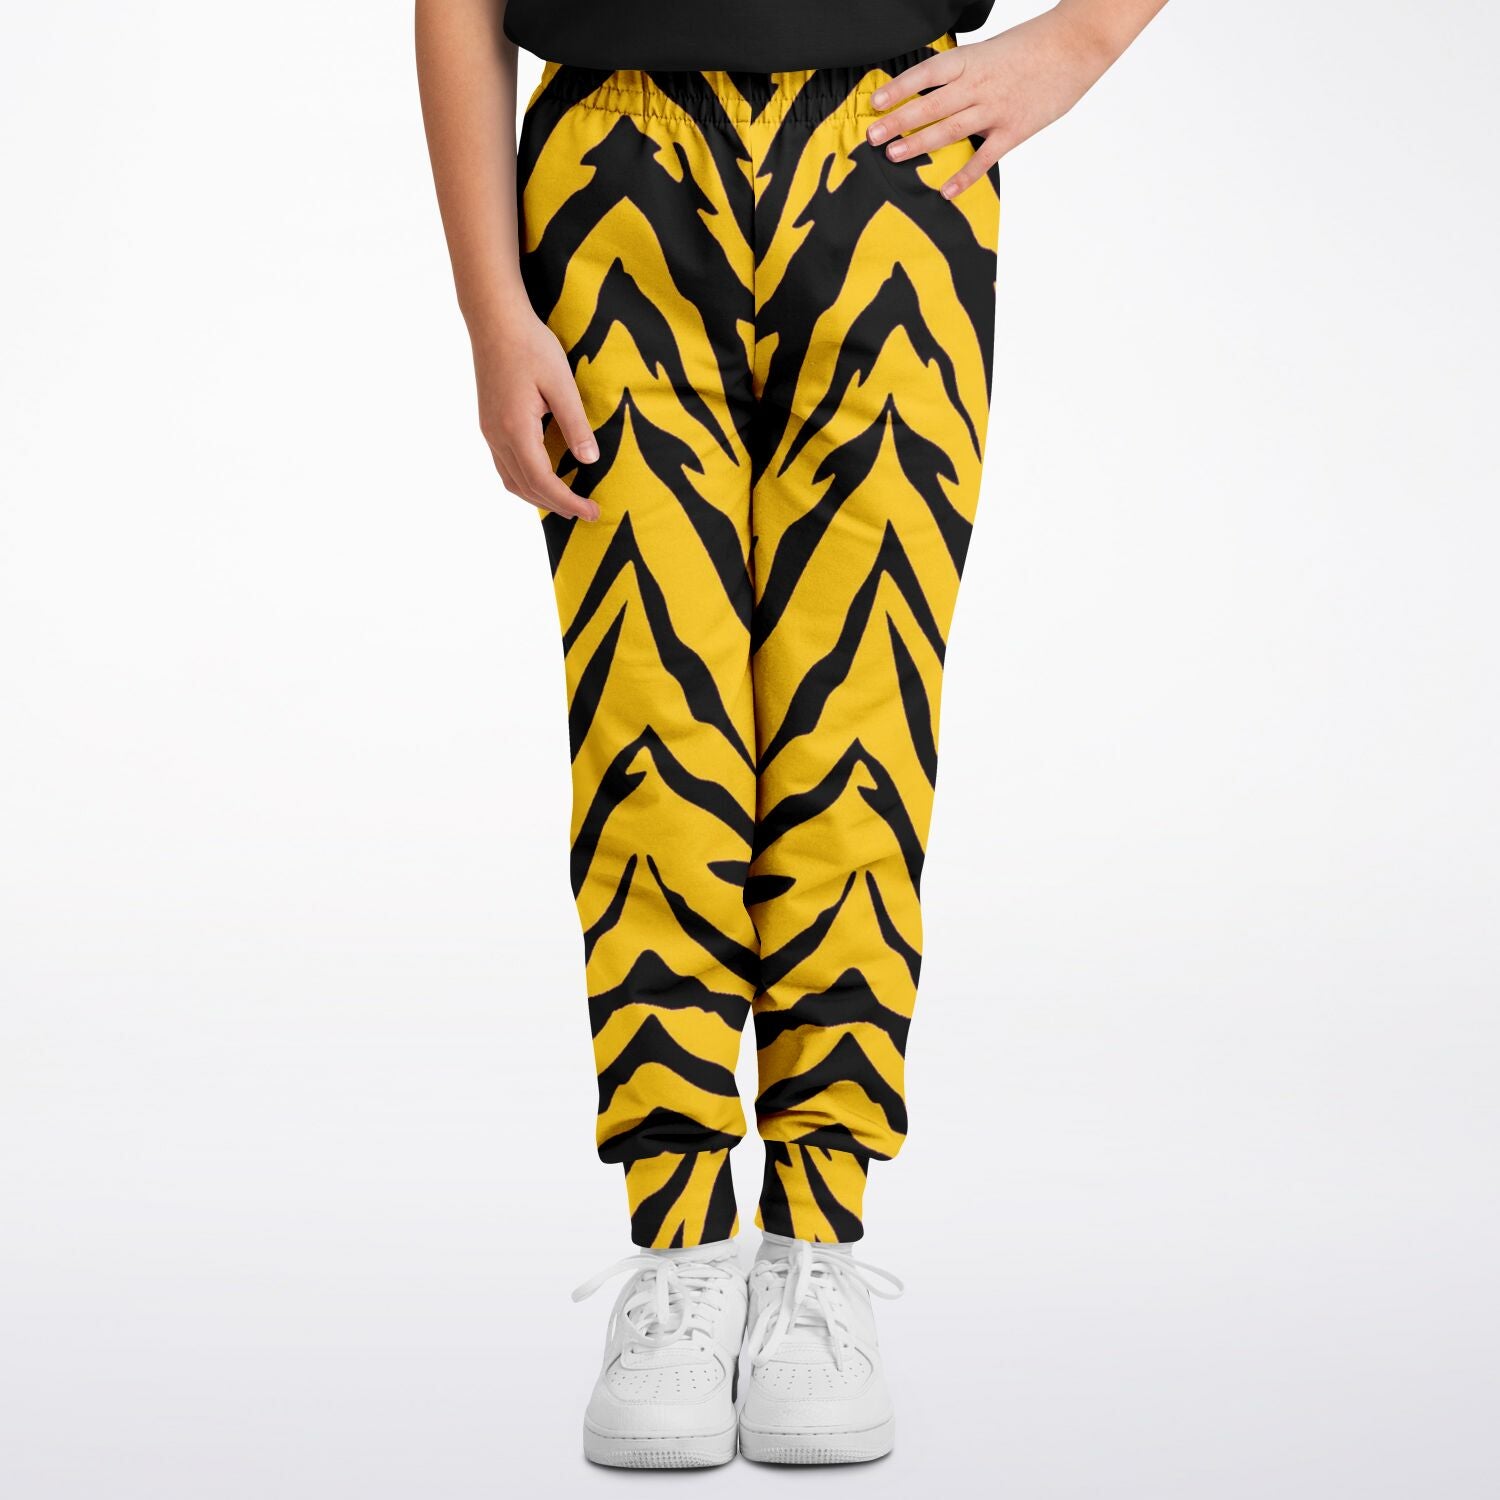 Black and Gold Tiger Stripe Youth Joggers